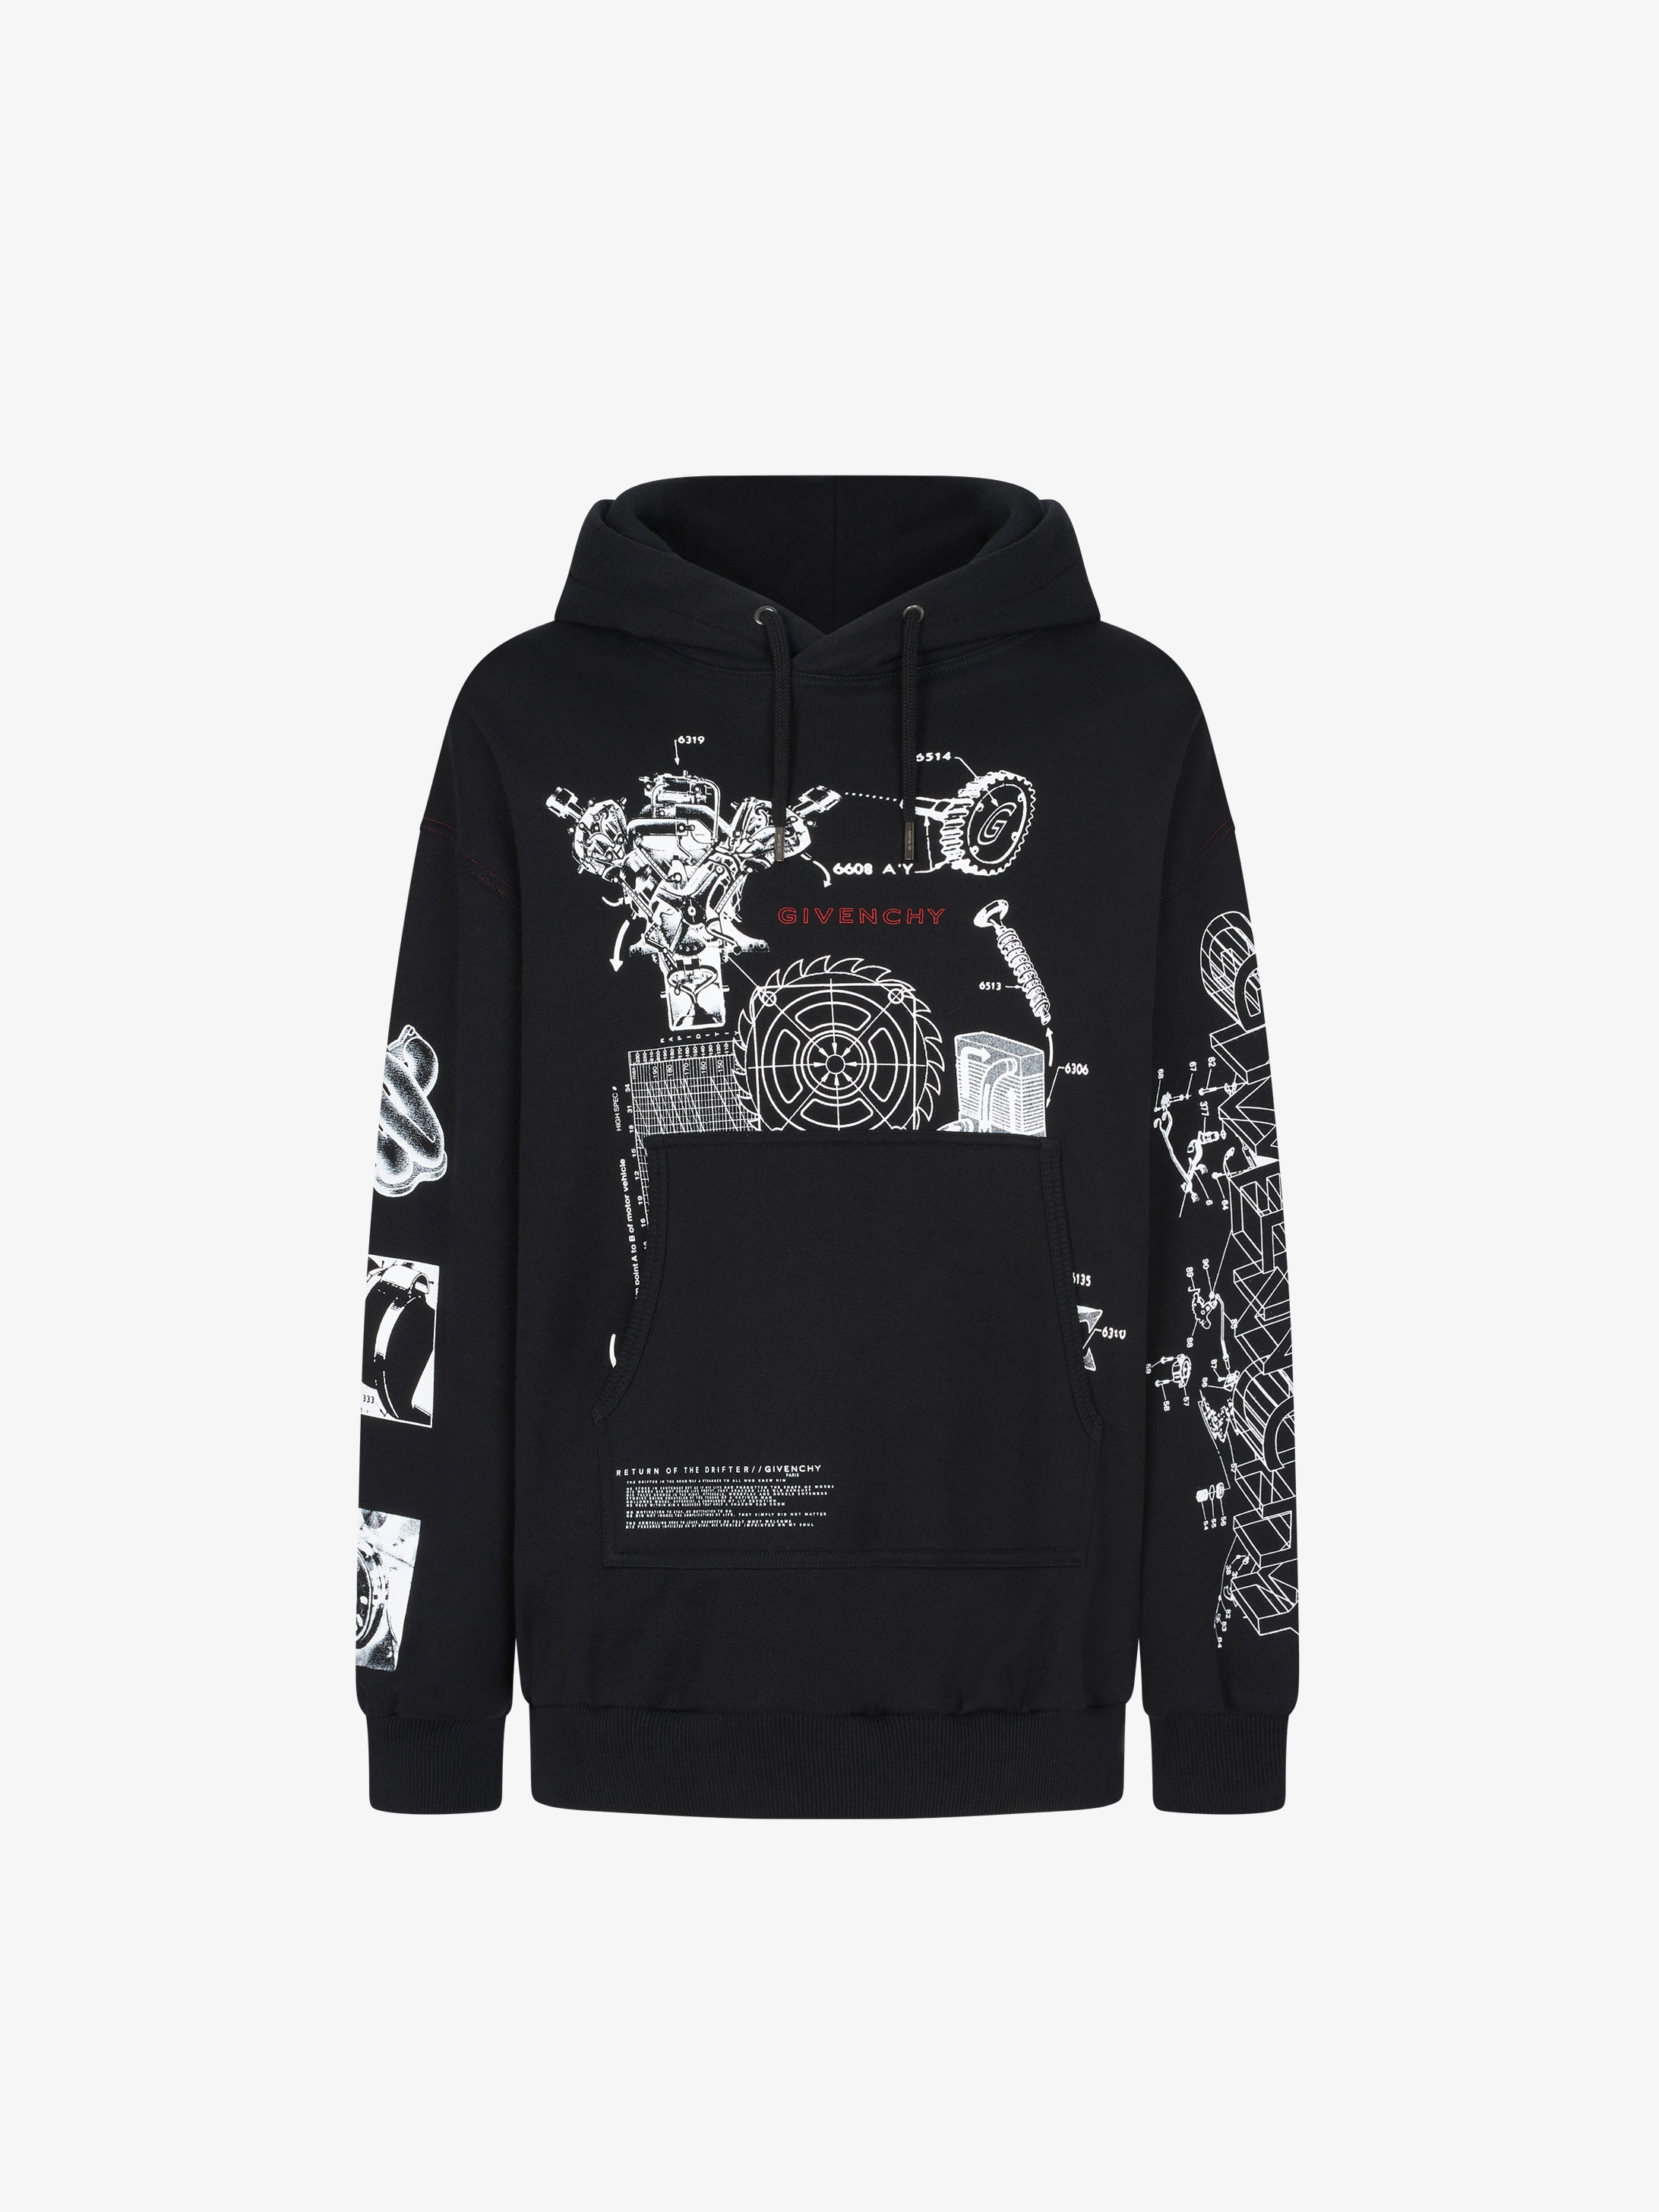 GIVENCHY Schematics oversized hoodie | GIVENCHY Paris